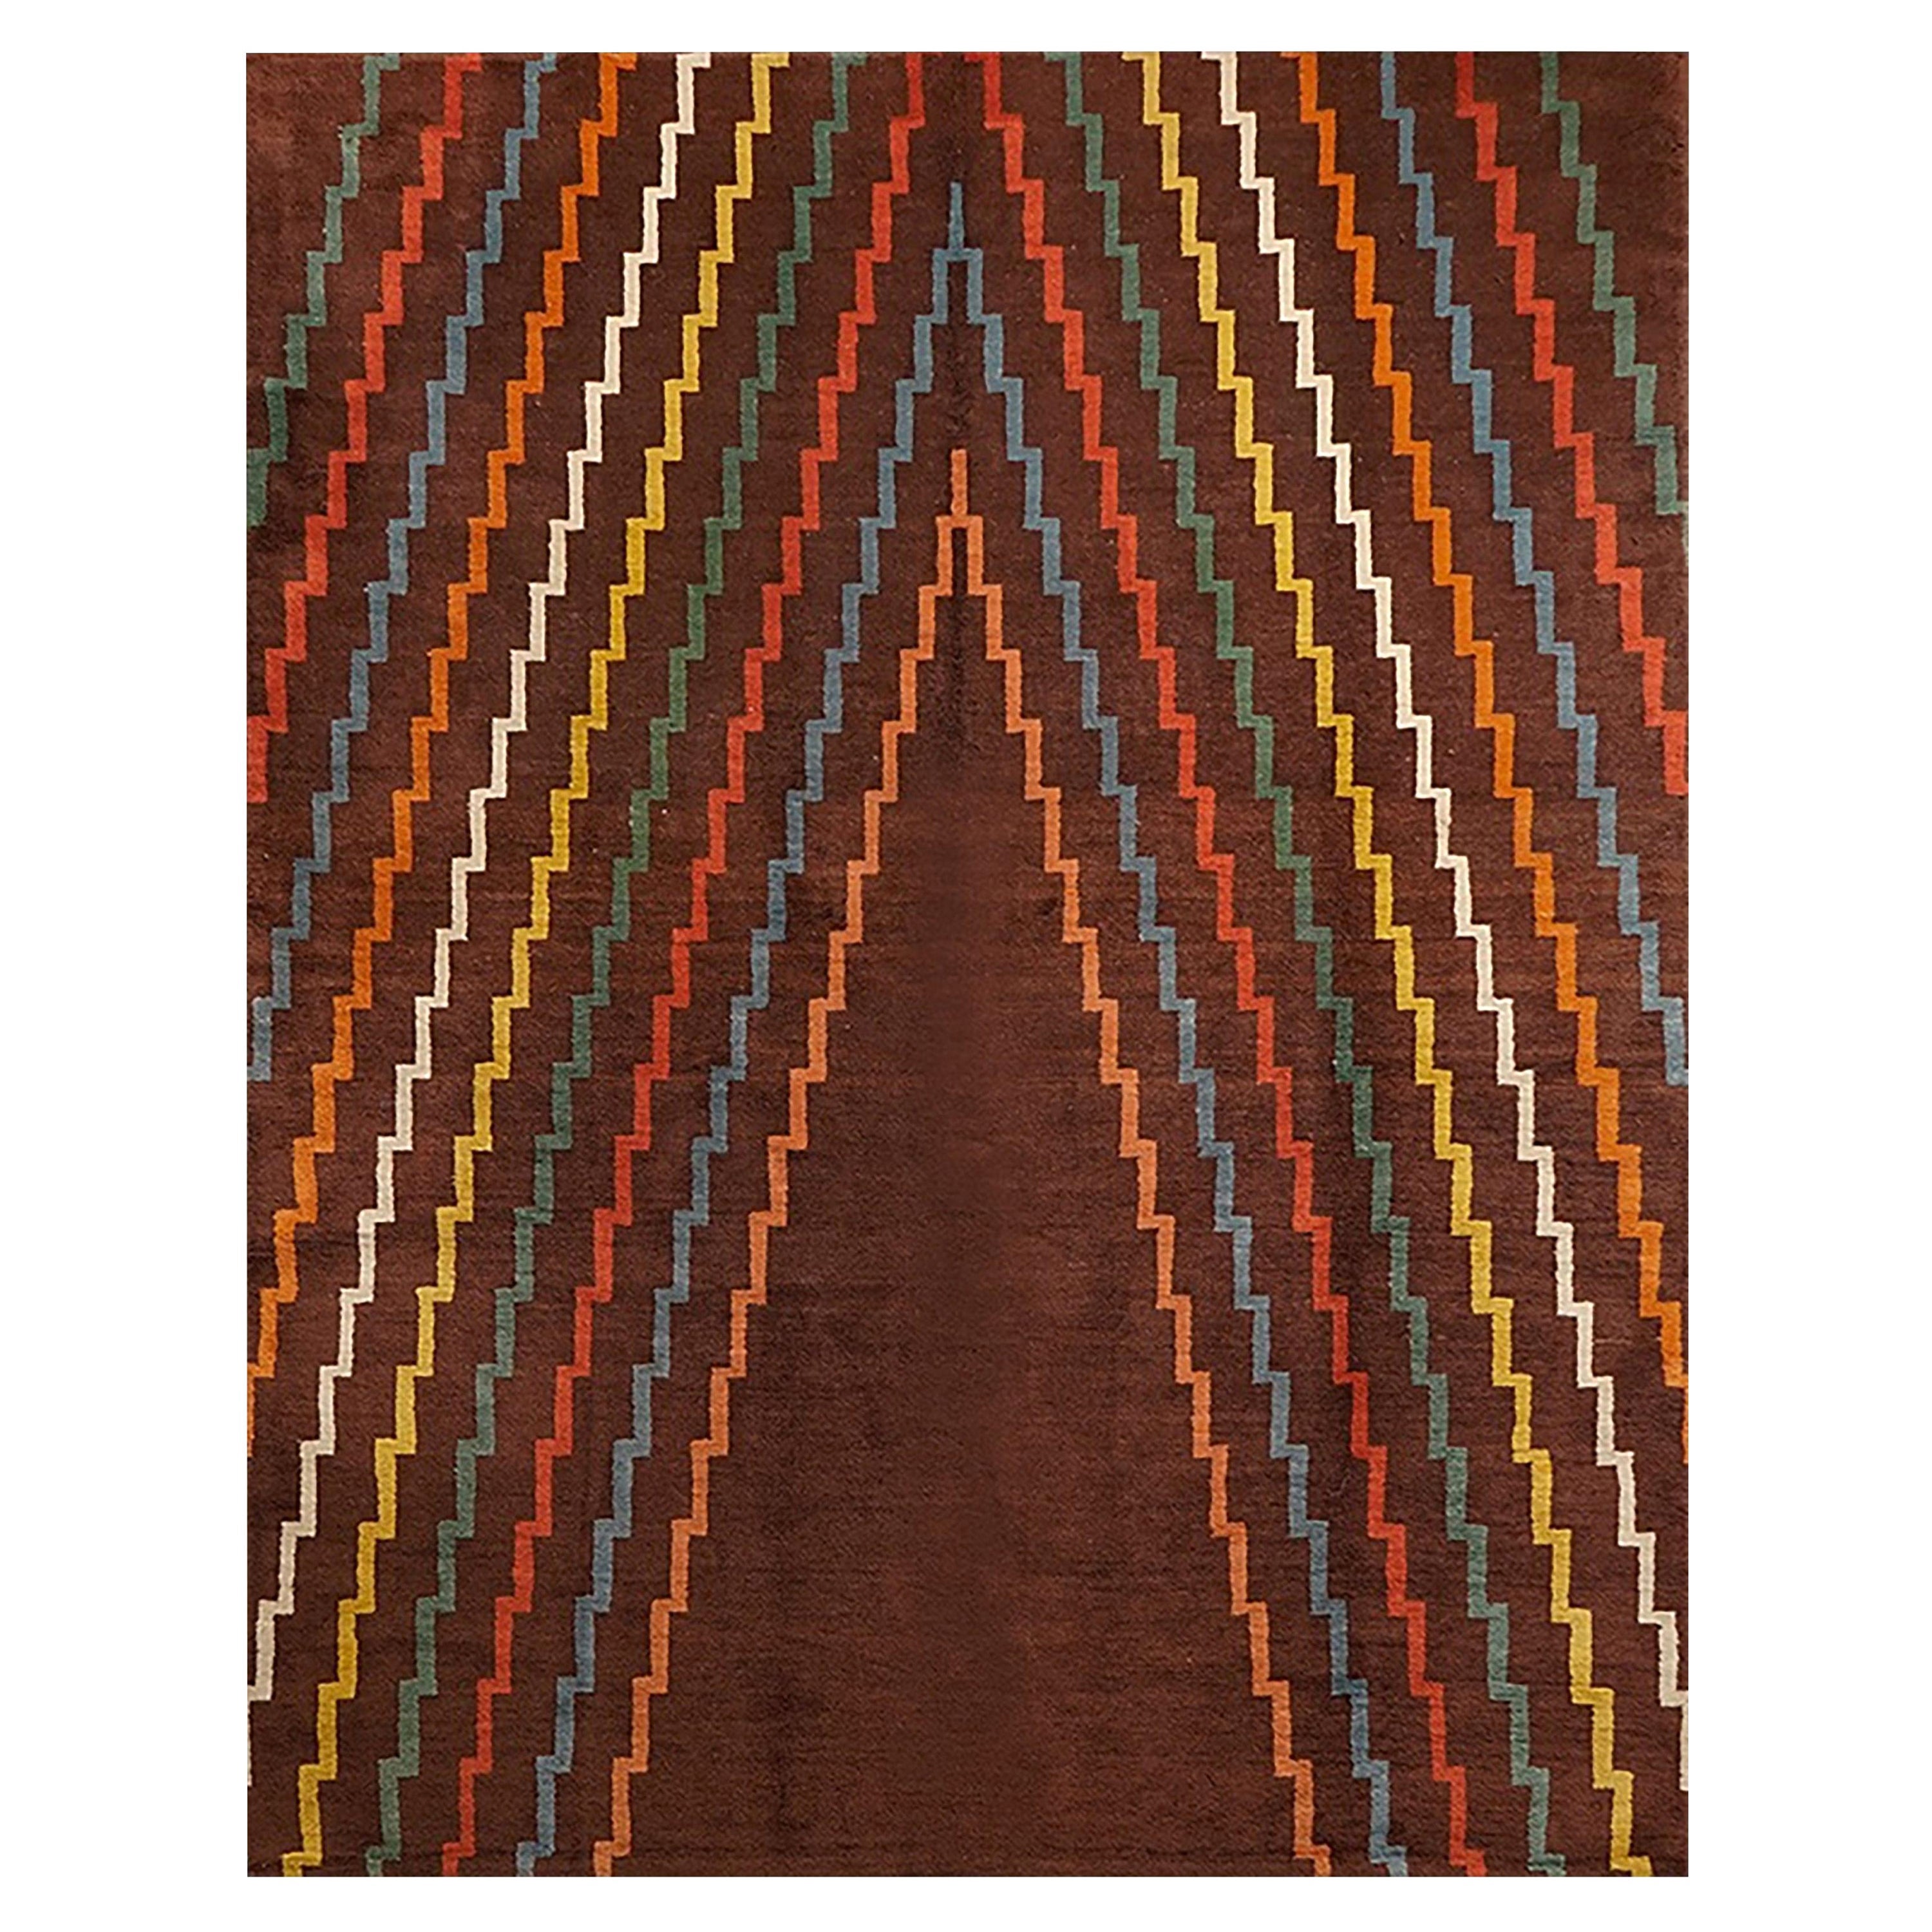 Aztec Design Geometrical Wool Rug, circa 1940s, Finest Quality Brown For Sale